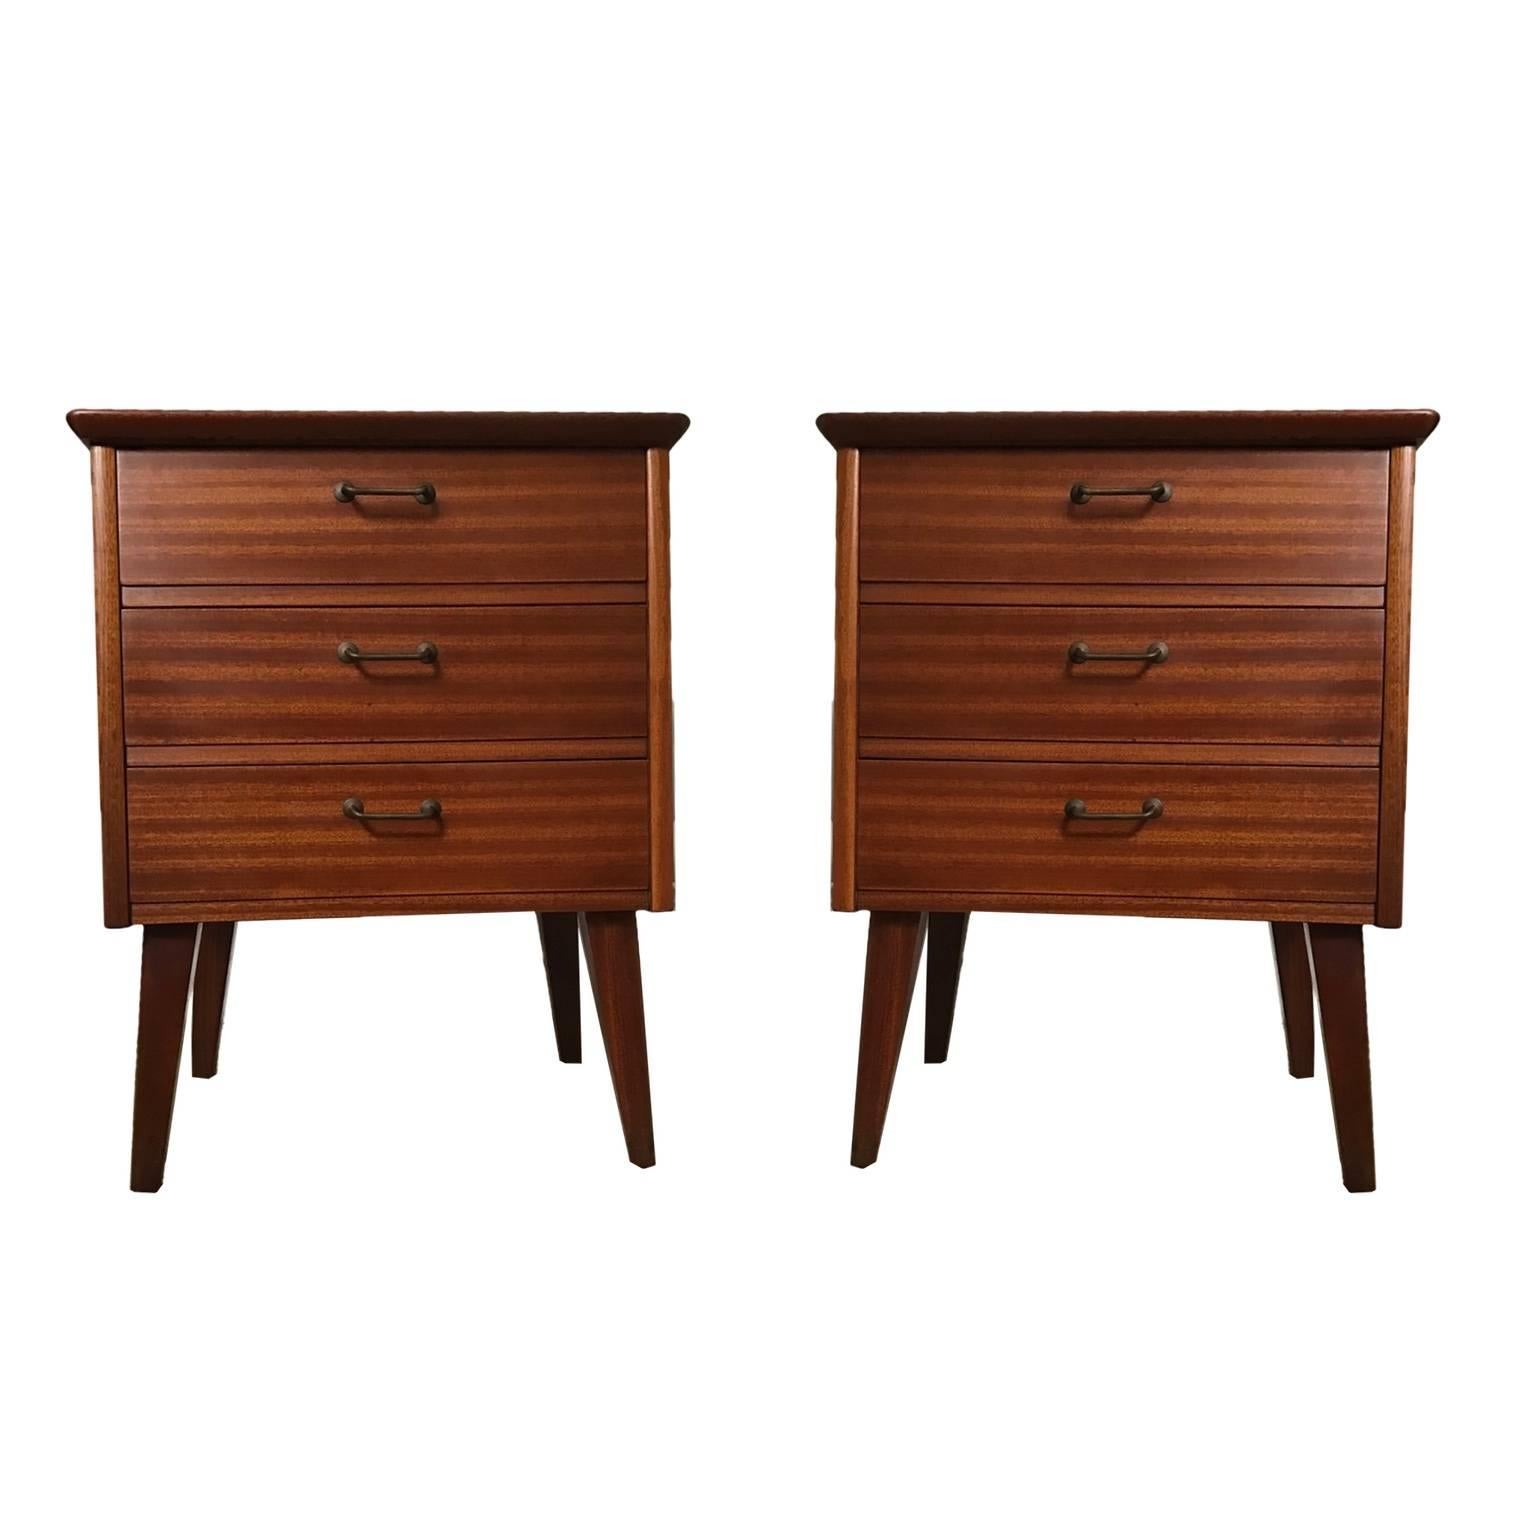 Cute pair of functional Cuban mahogany end stands with brass pulls.